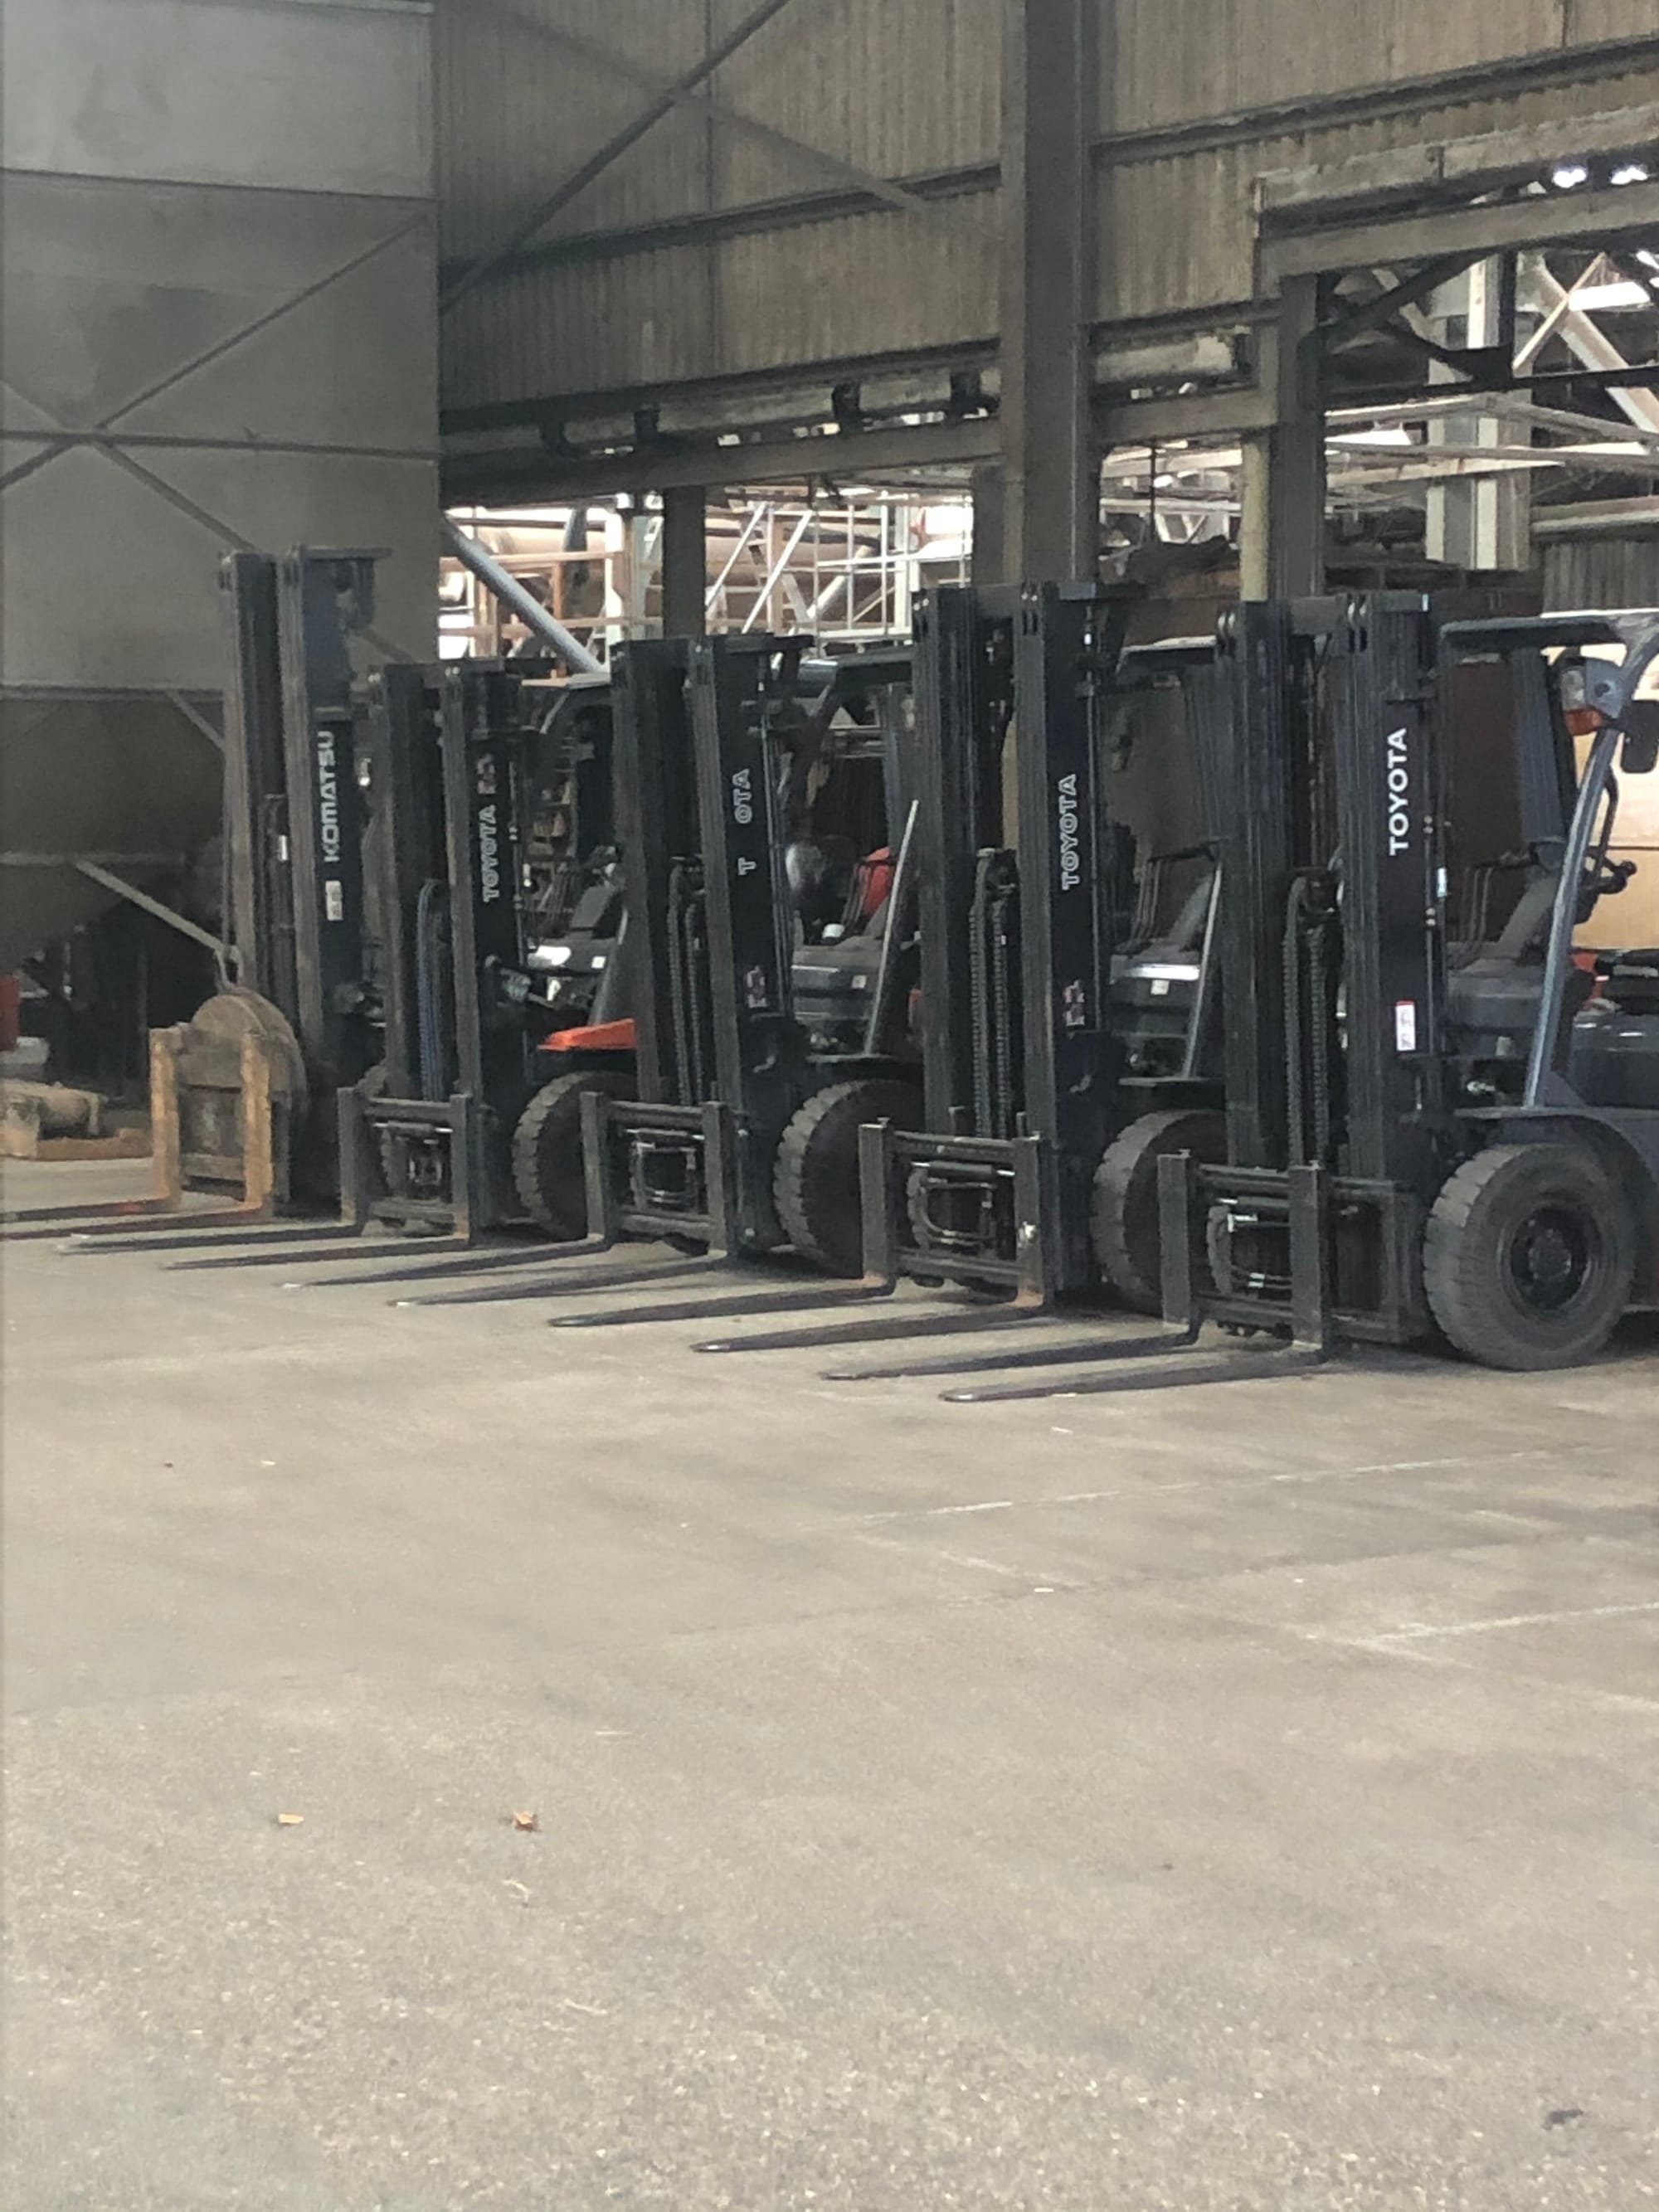 Fork lifts all serviced and ready for the season